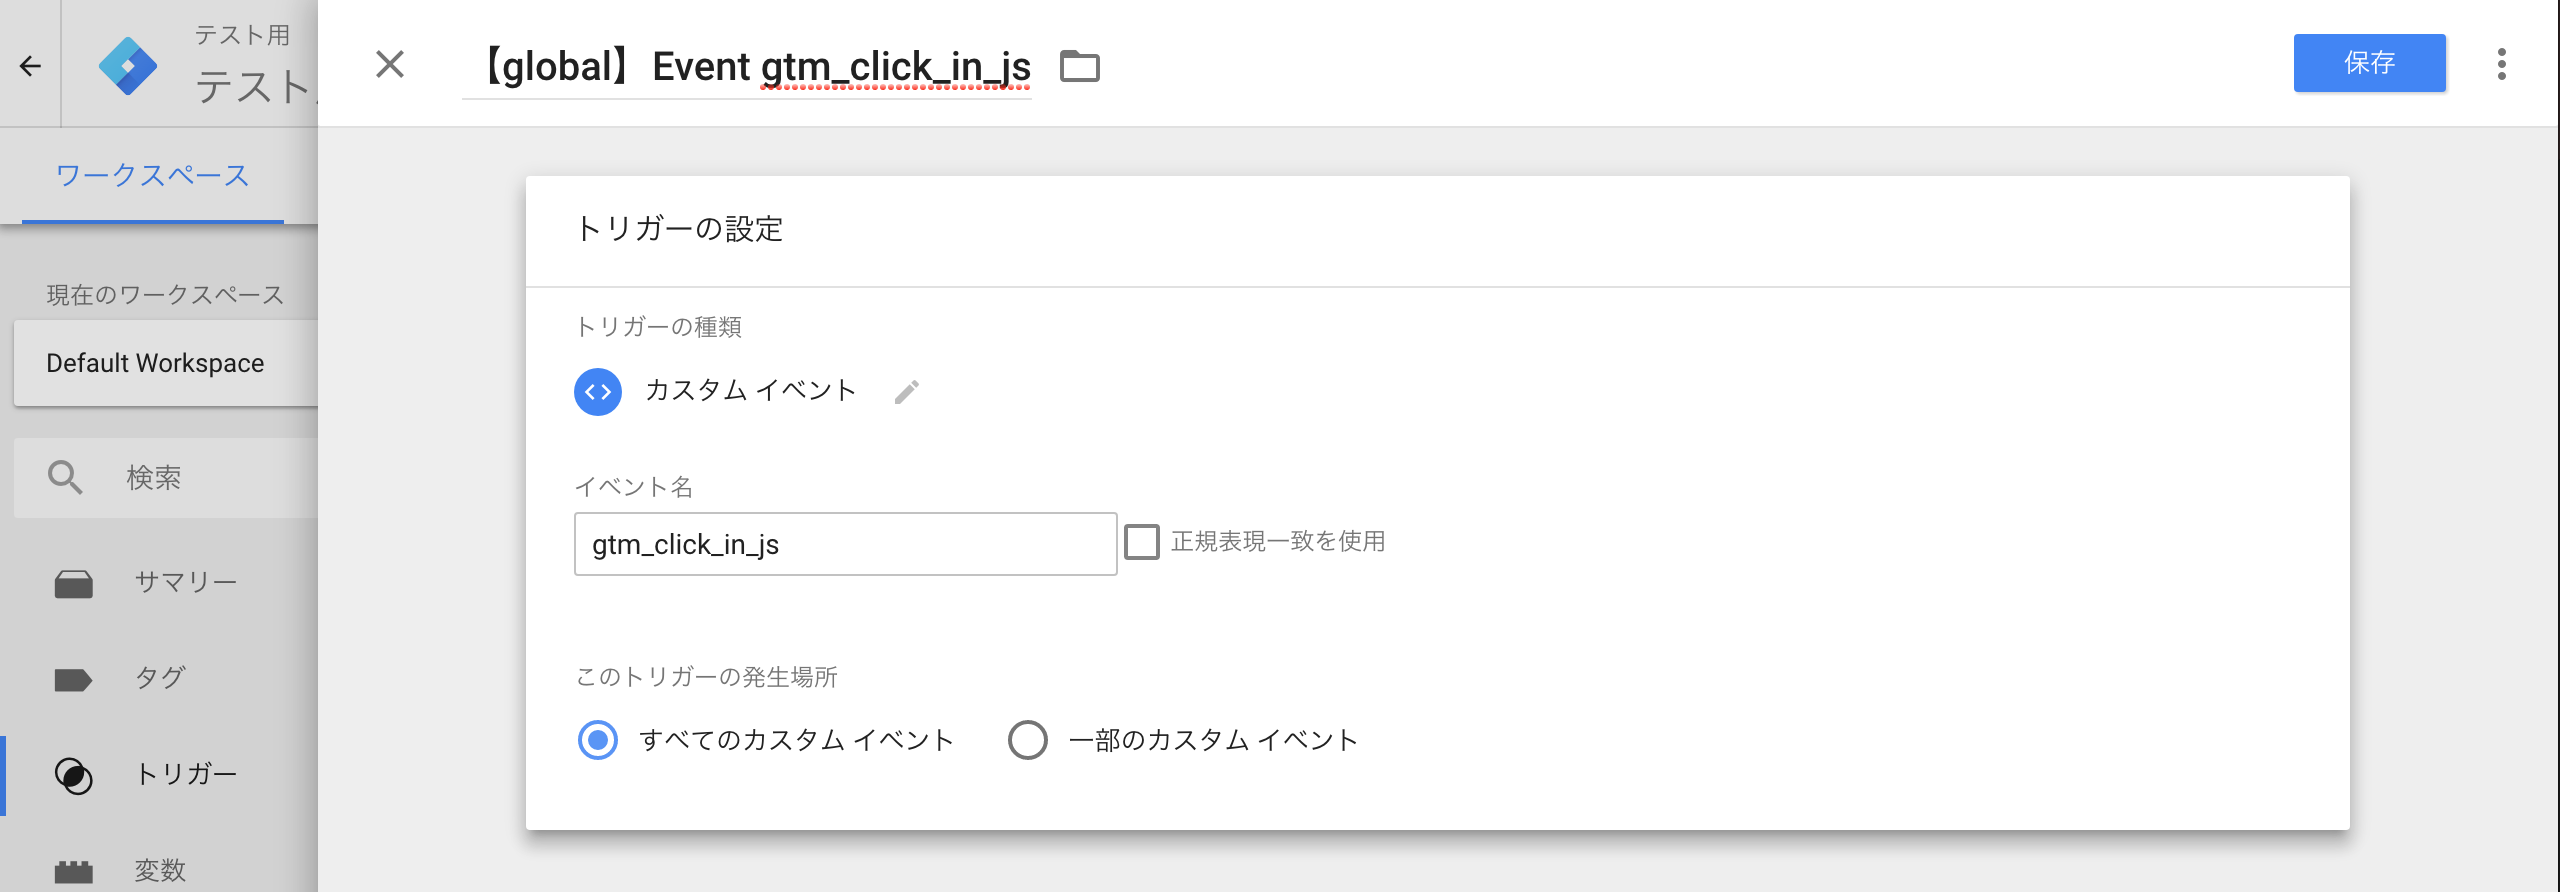 GTM_トリガー_event_gtm_click_in_js.png